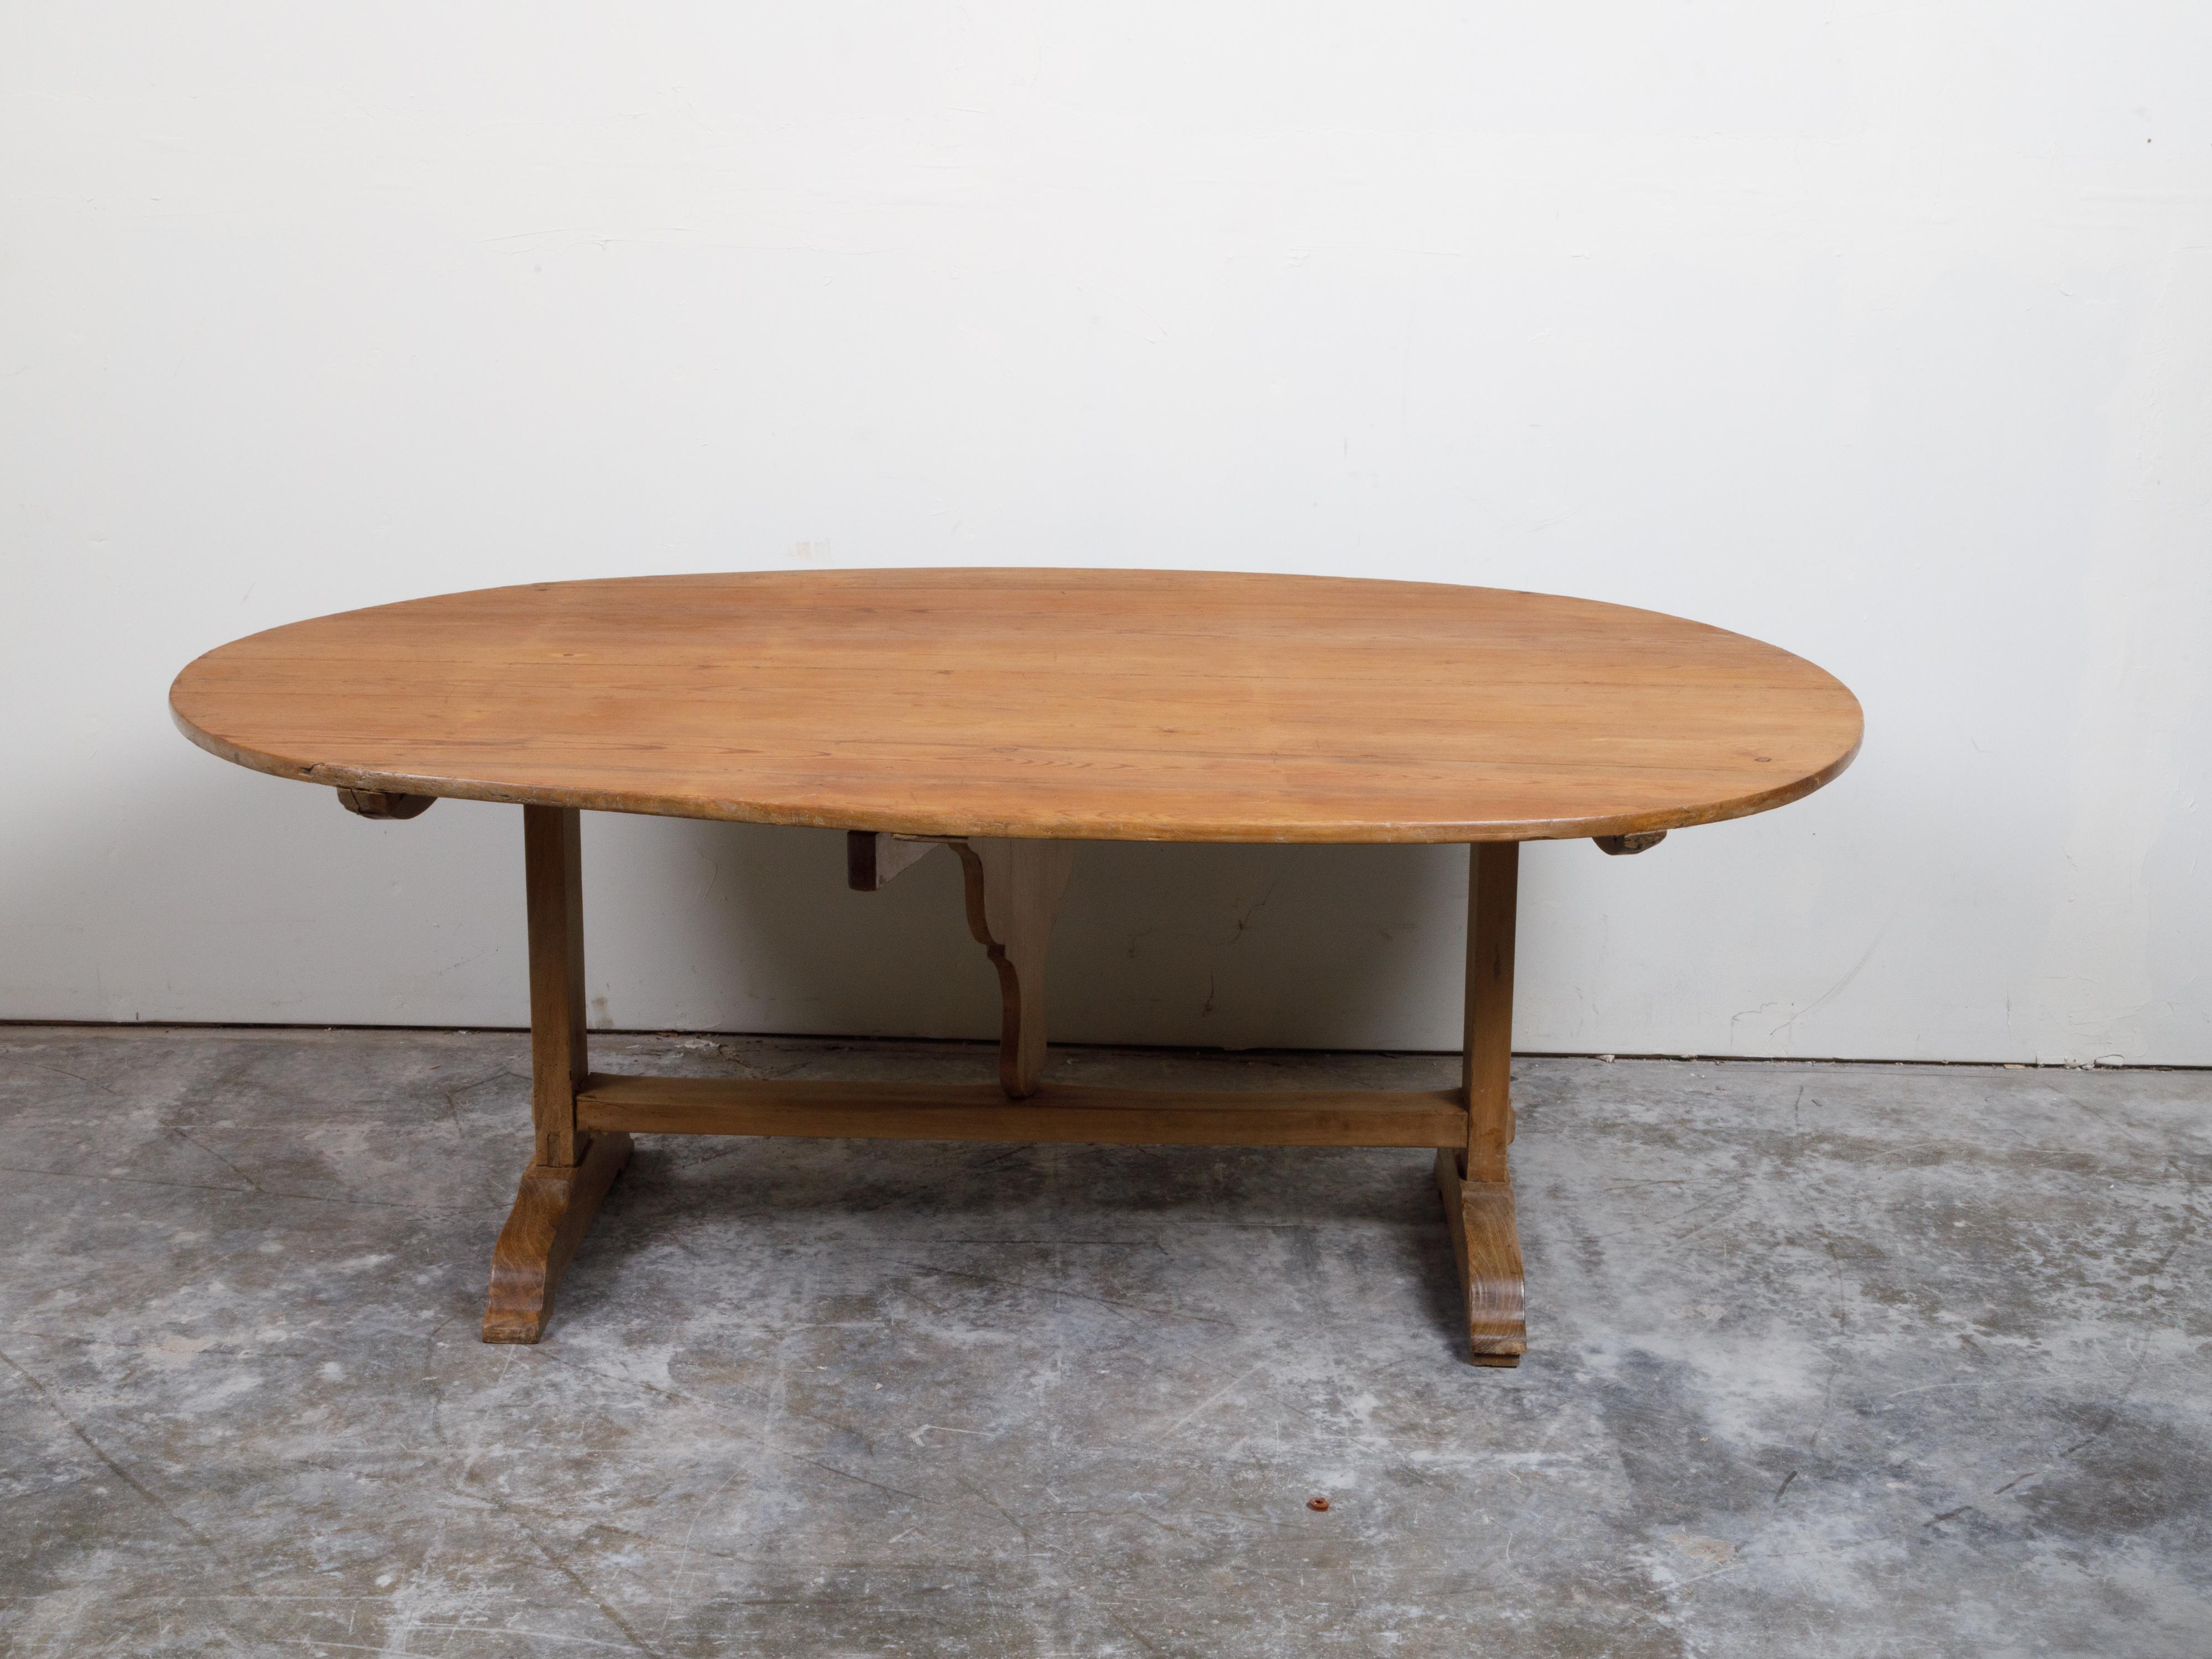 A French large walnut tilt-top table from the 19th century, with oval top and trestle base. Created in France during the 19th century, this large walnut farm table features an oval tilt top resting above a rustic trestle base with simple wedge. With